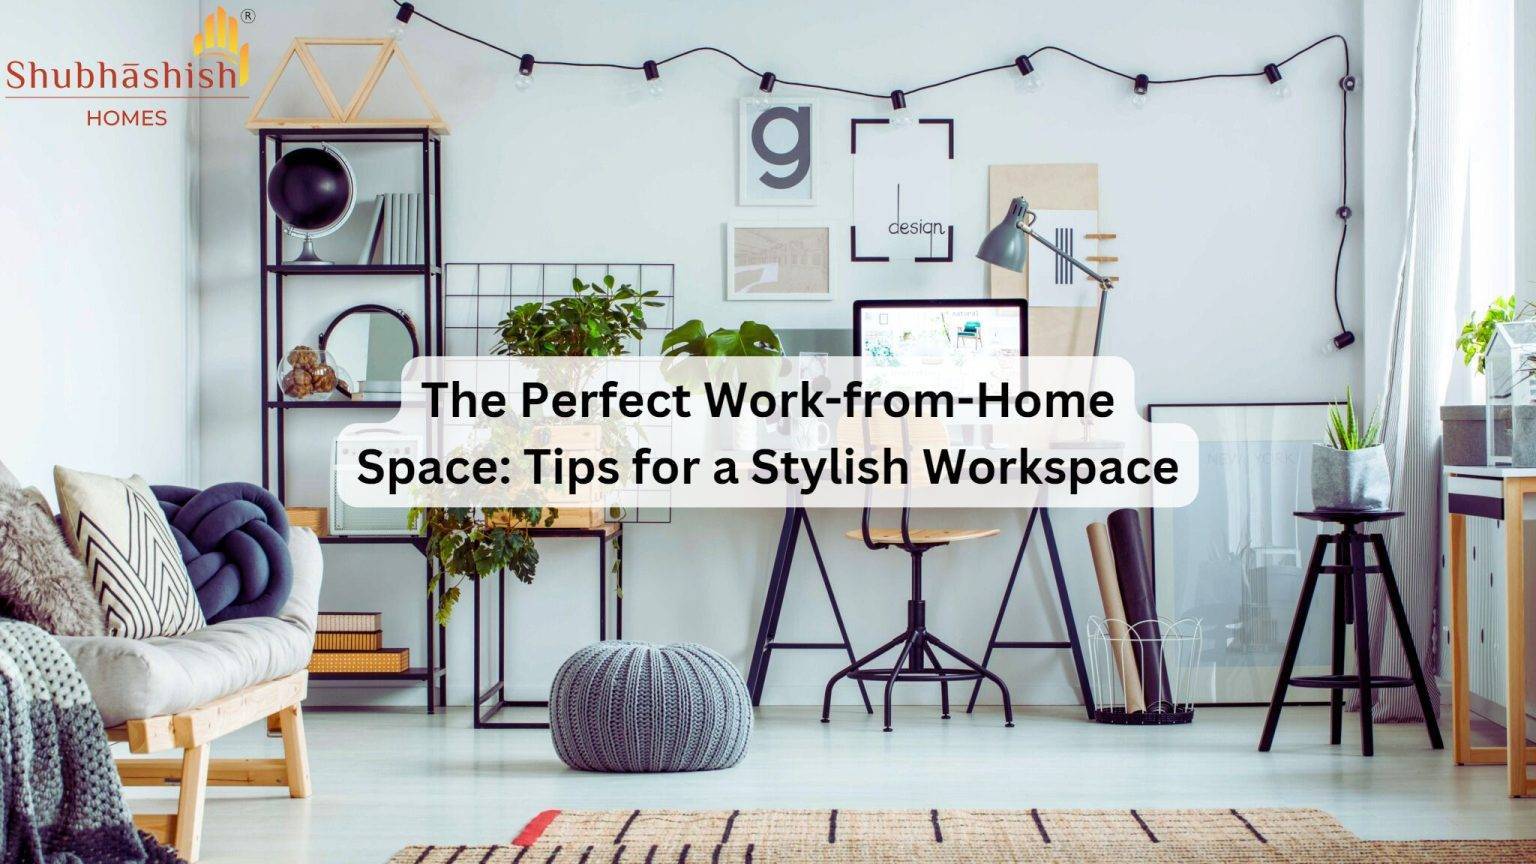 An Ideal Work-from-Home Space: Tips for a Stylish Workspace